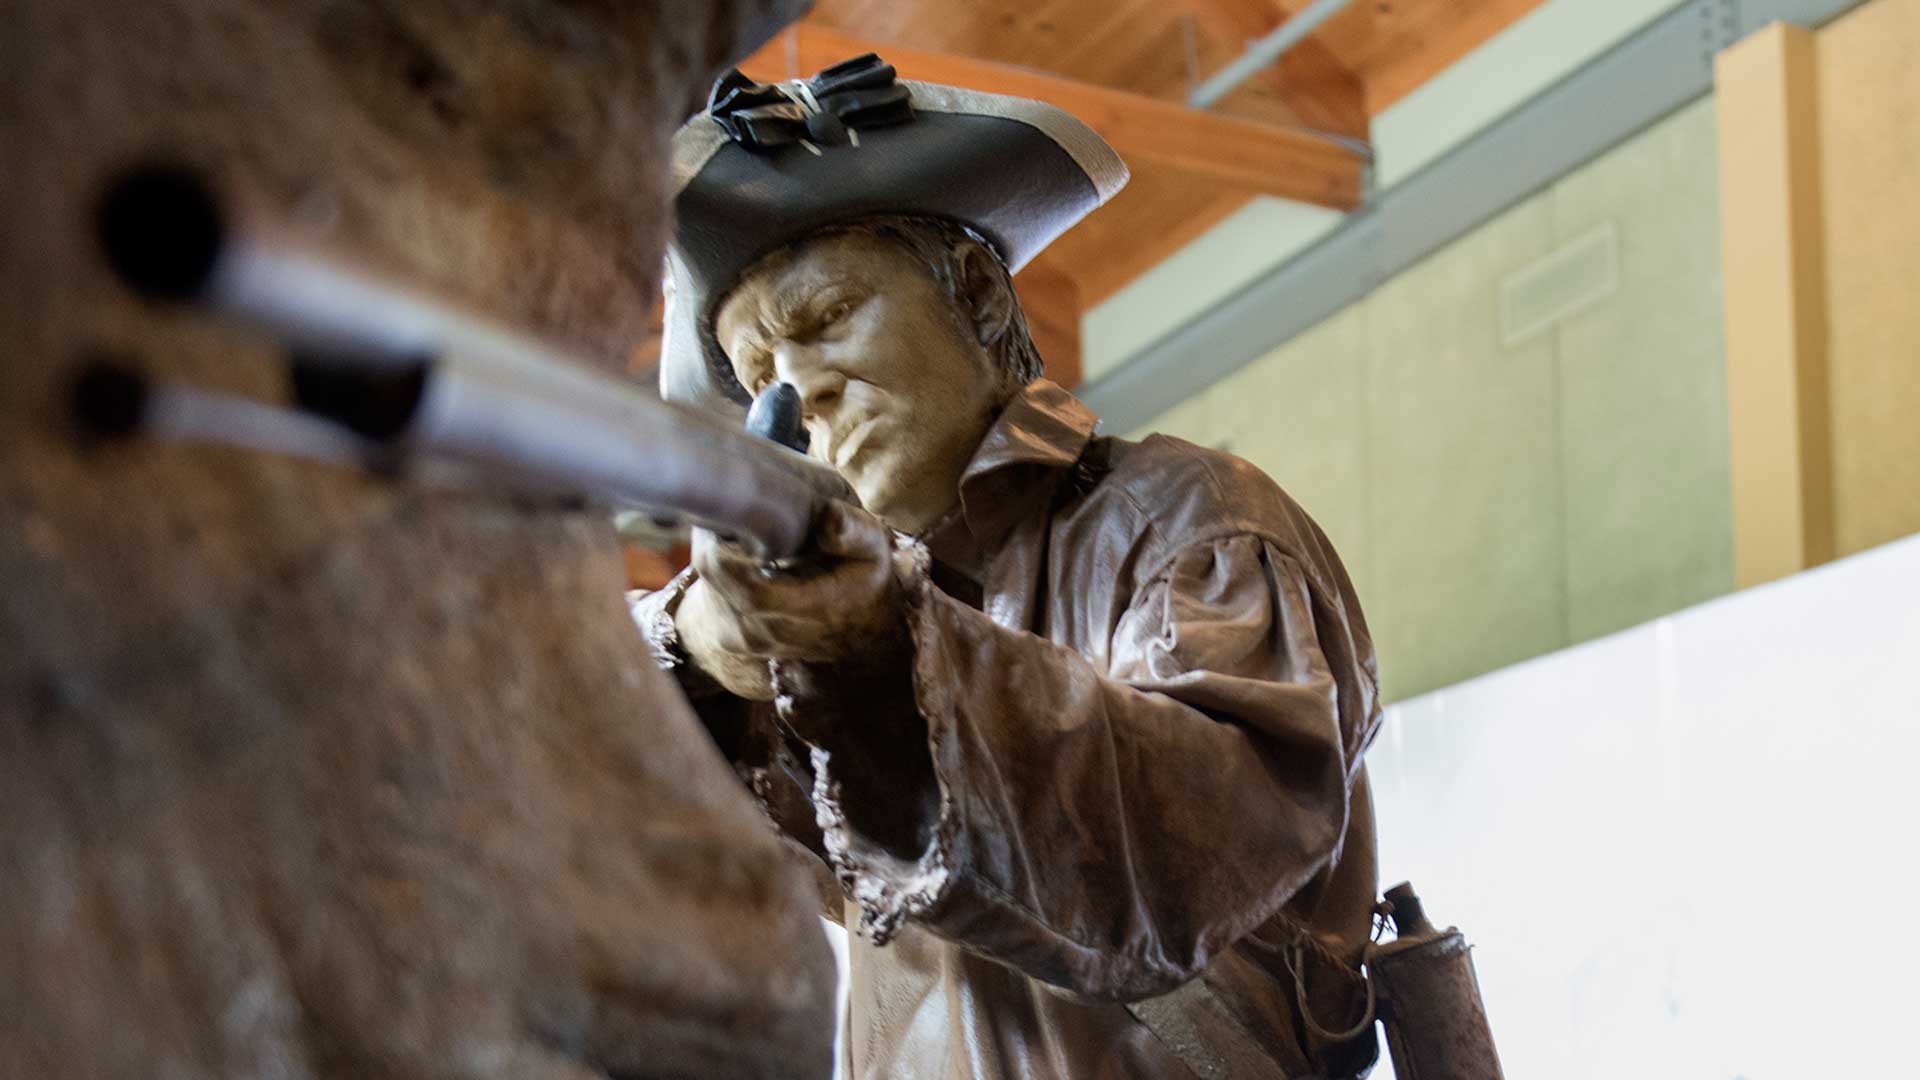 A model of a soldier crouches in the Fort Necessity National Battlefield Visitor Center in Farmington on June 22, 2016. (Haley Nelson/Post-Gazette)